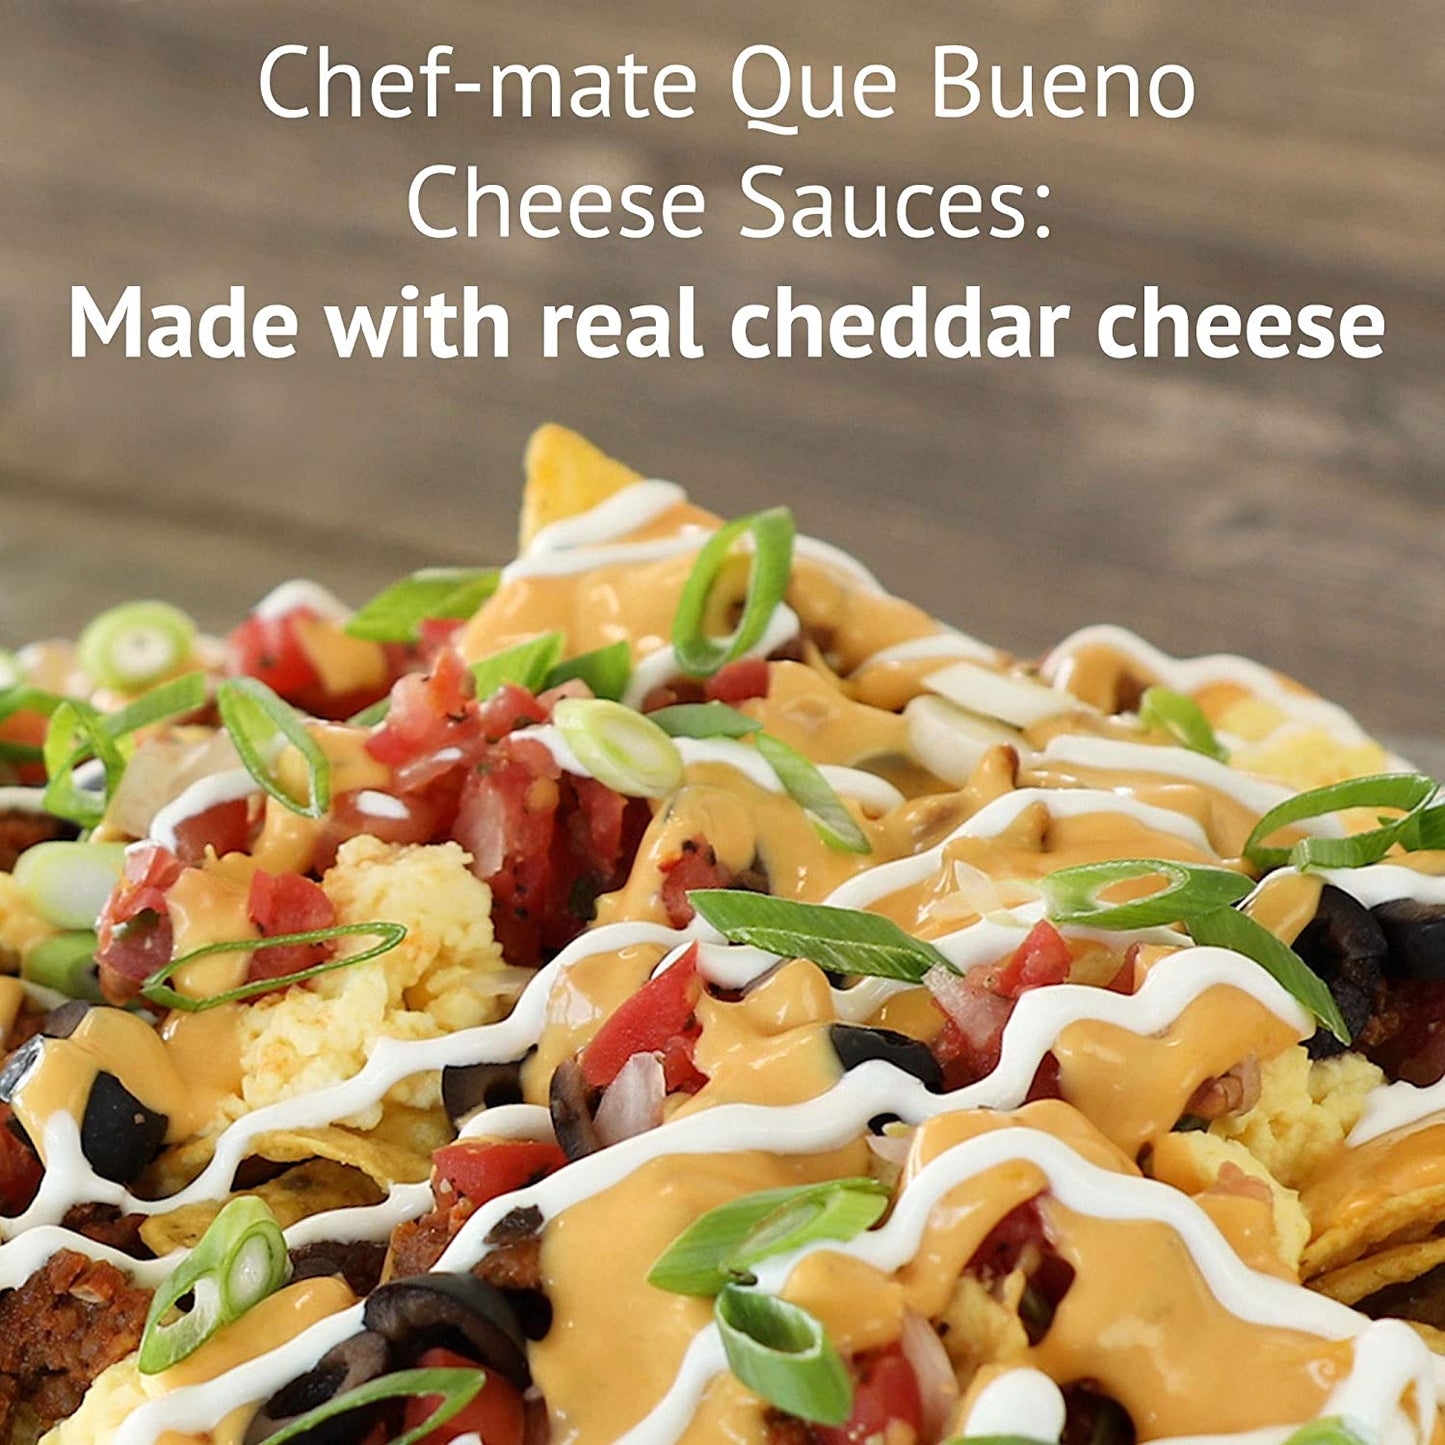 Chef-mate Que Bueno Spicy Nacho Cheese Sauce, Jalapeno Queso, Canned Food, 6 lb 10 oz (#10 Can Bulk)